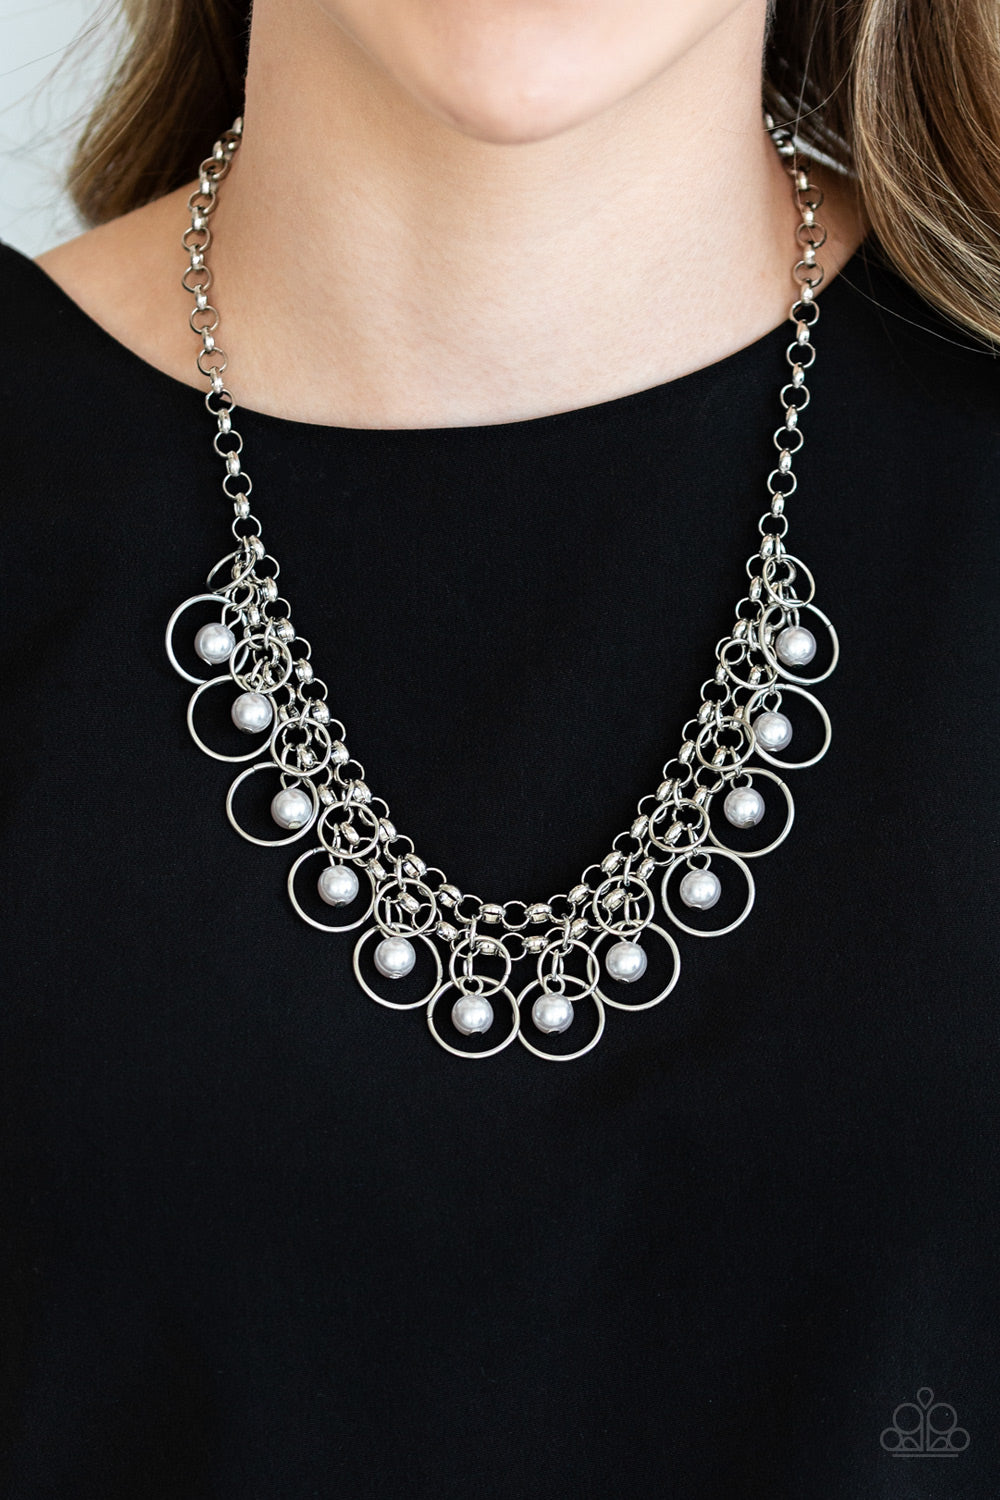 PARTY TIME - SILVER GRAY PEARLS IN HOOPS NECKLACE